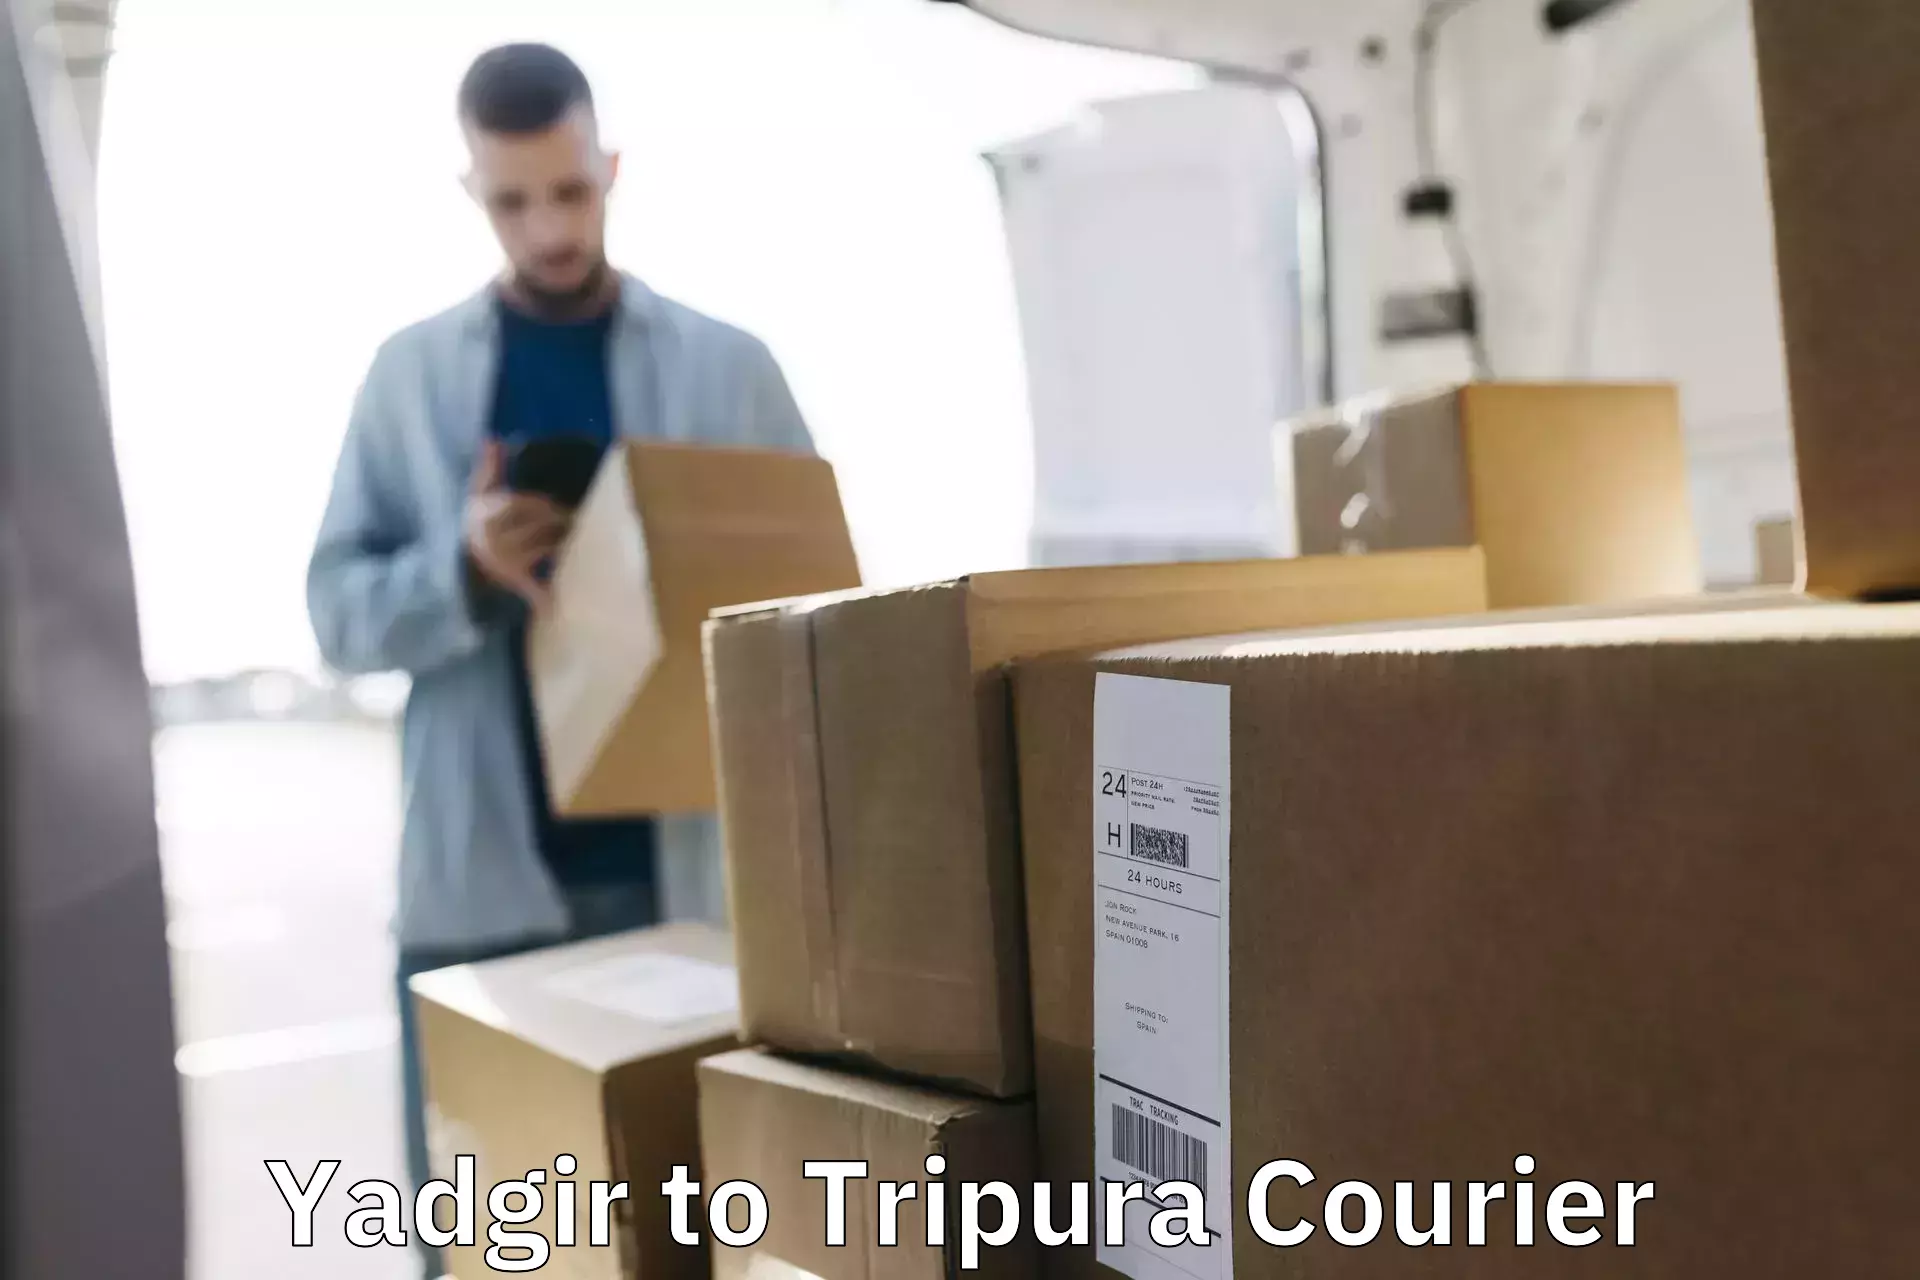 State-of-the-art courier technology Yadgir to Udaipur Tripura